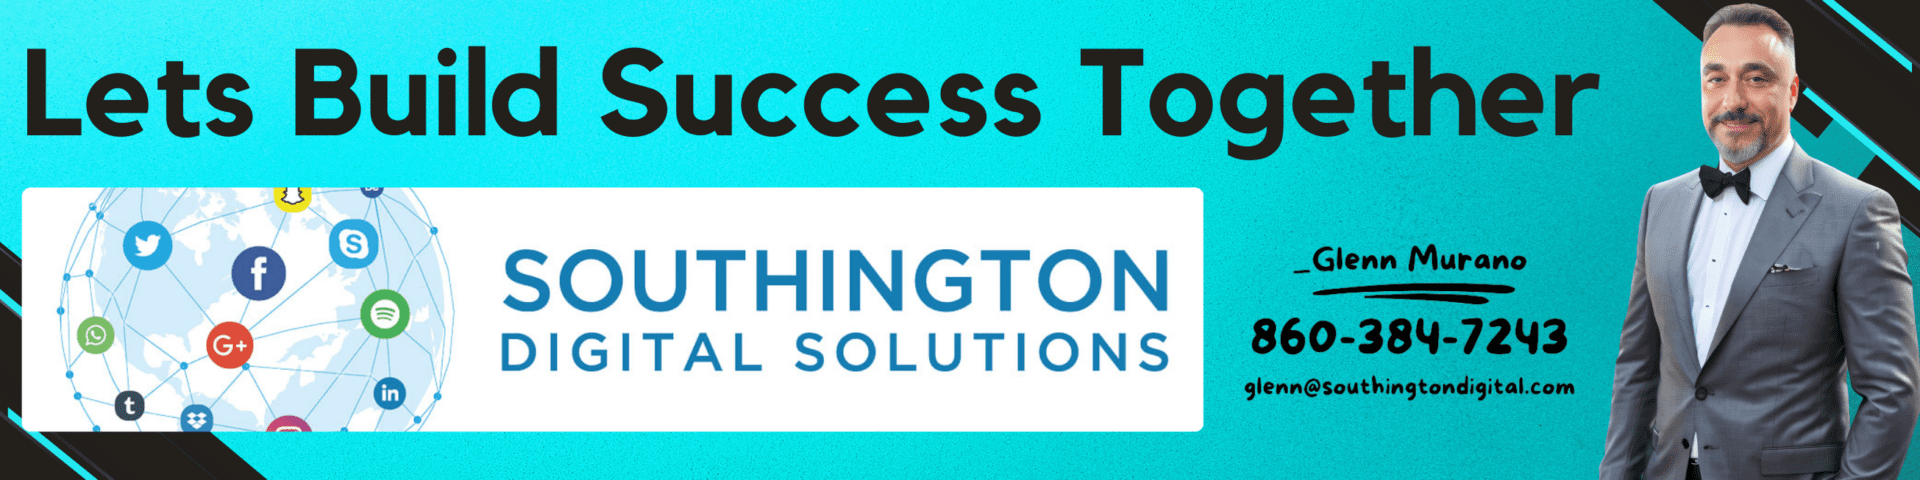 let's grow together contact Southington Digital Solutions